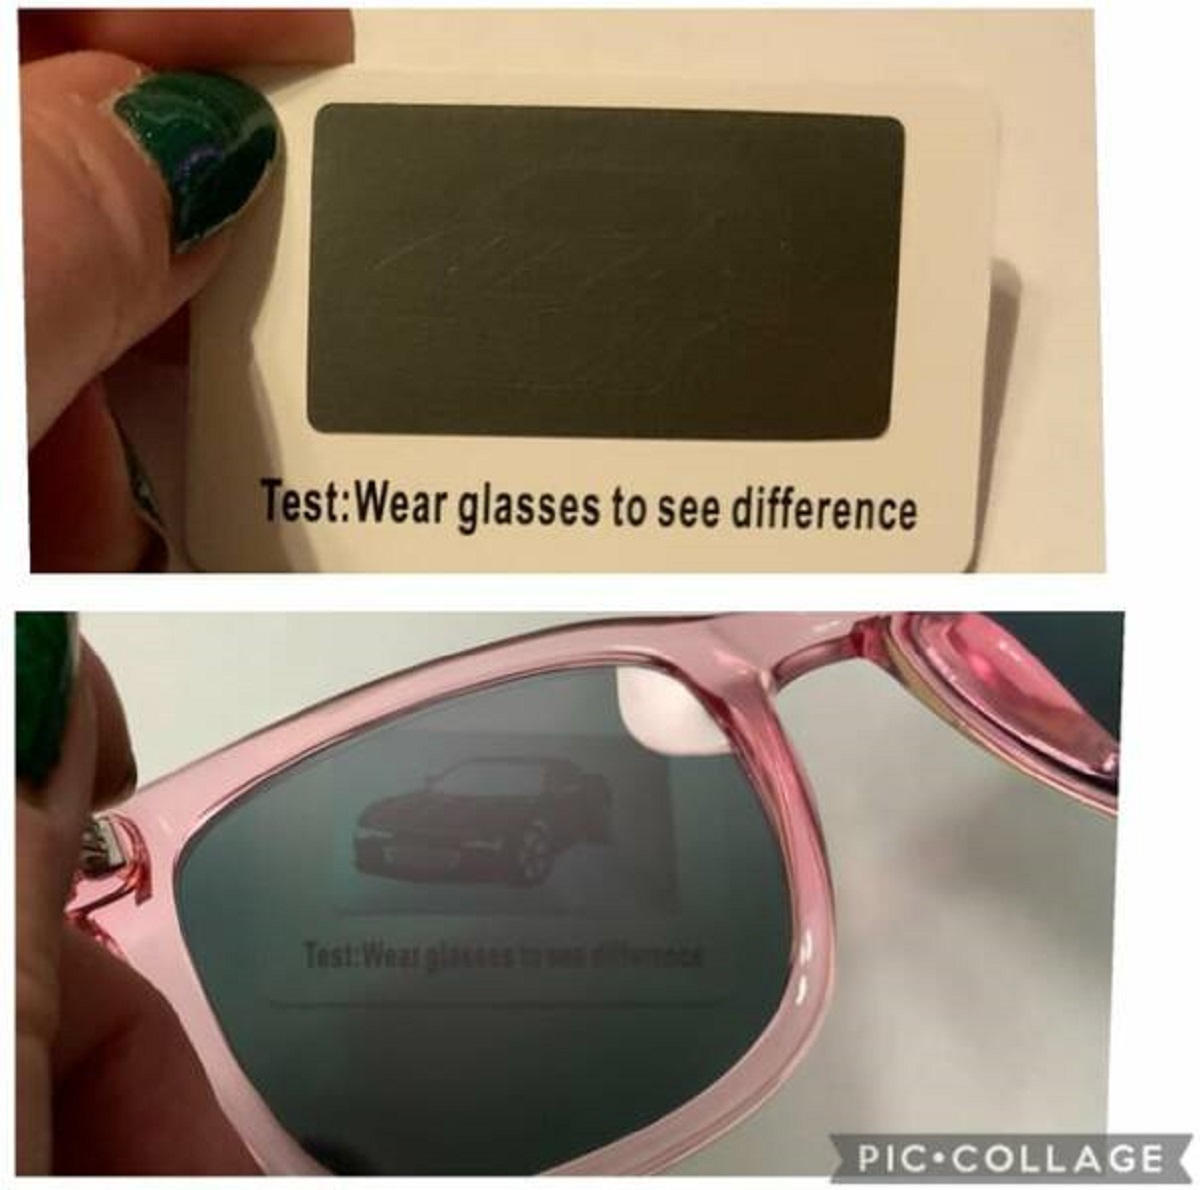 goggles - TestWear glasses to see difference TestWear glasses to difference Pic Collage